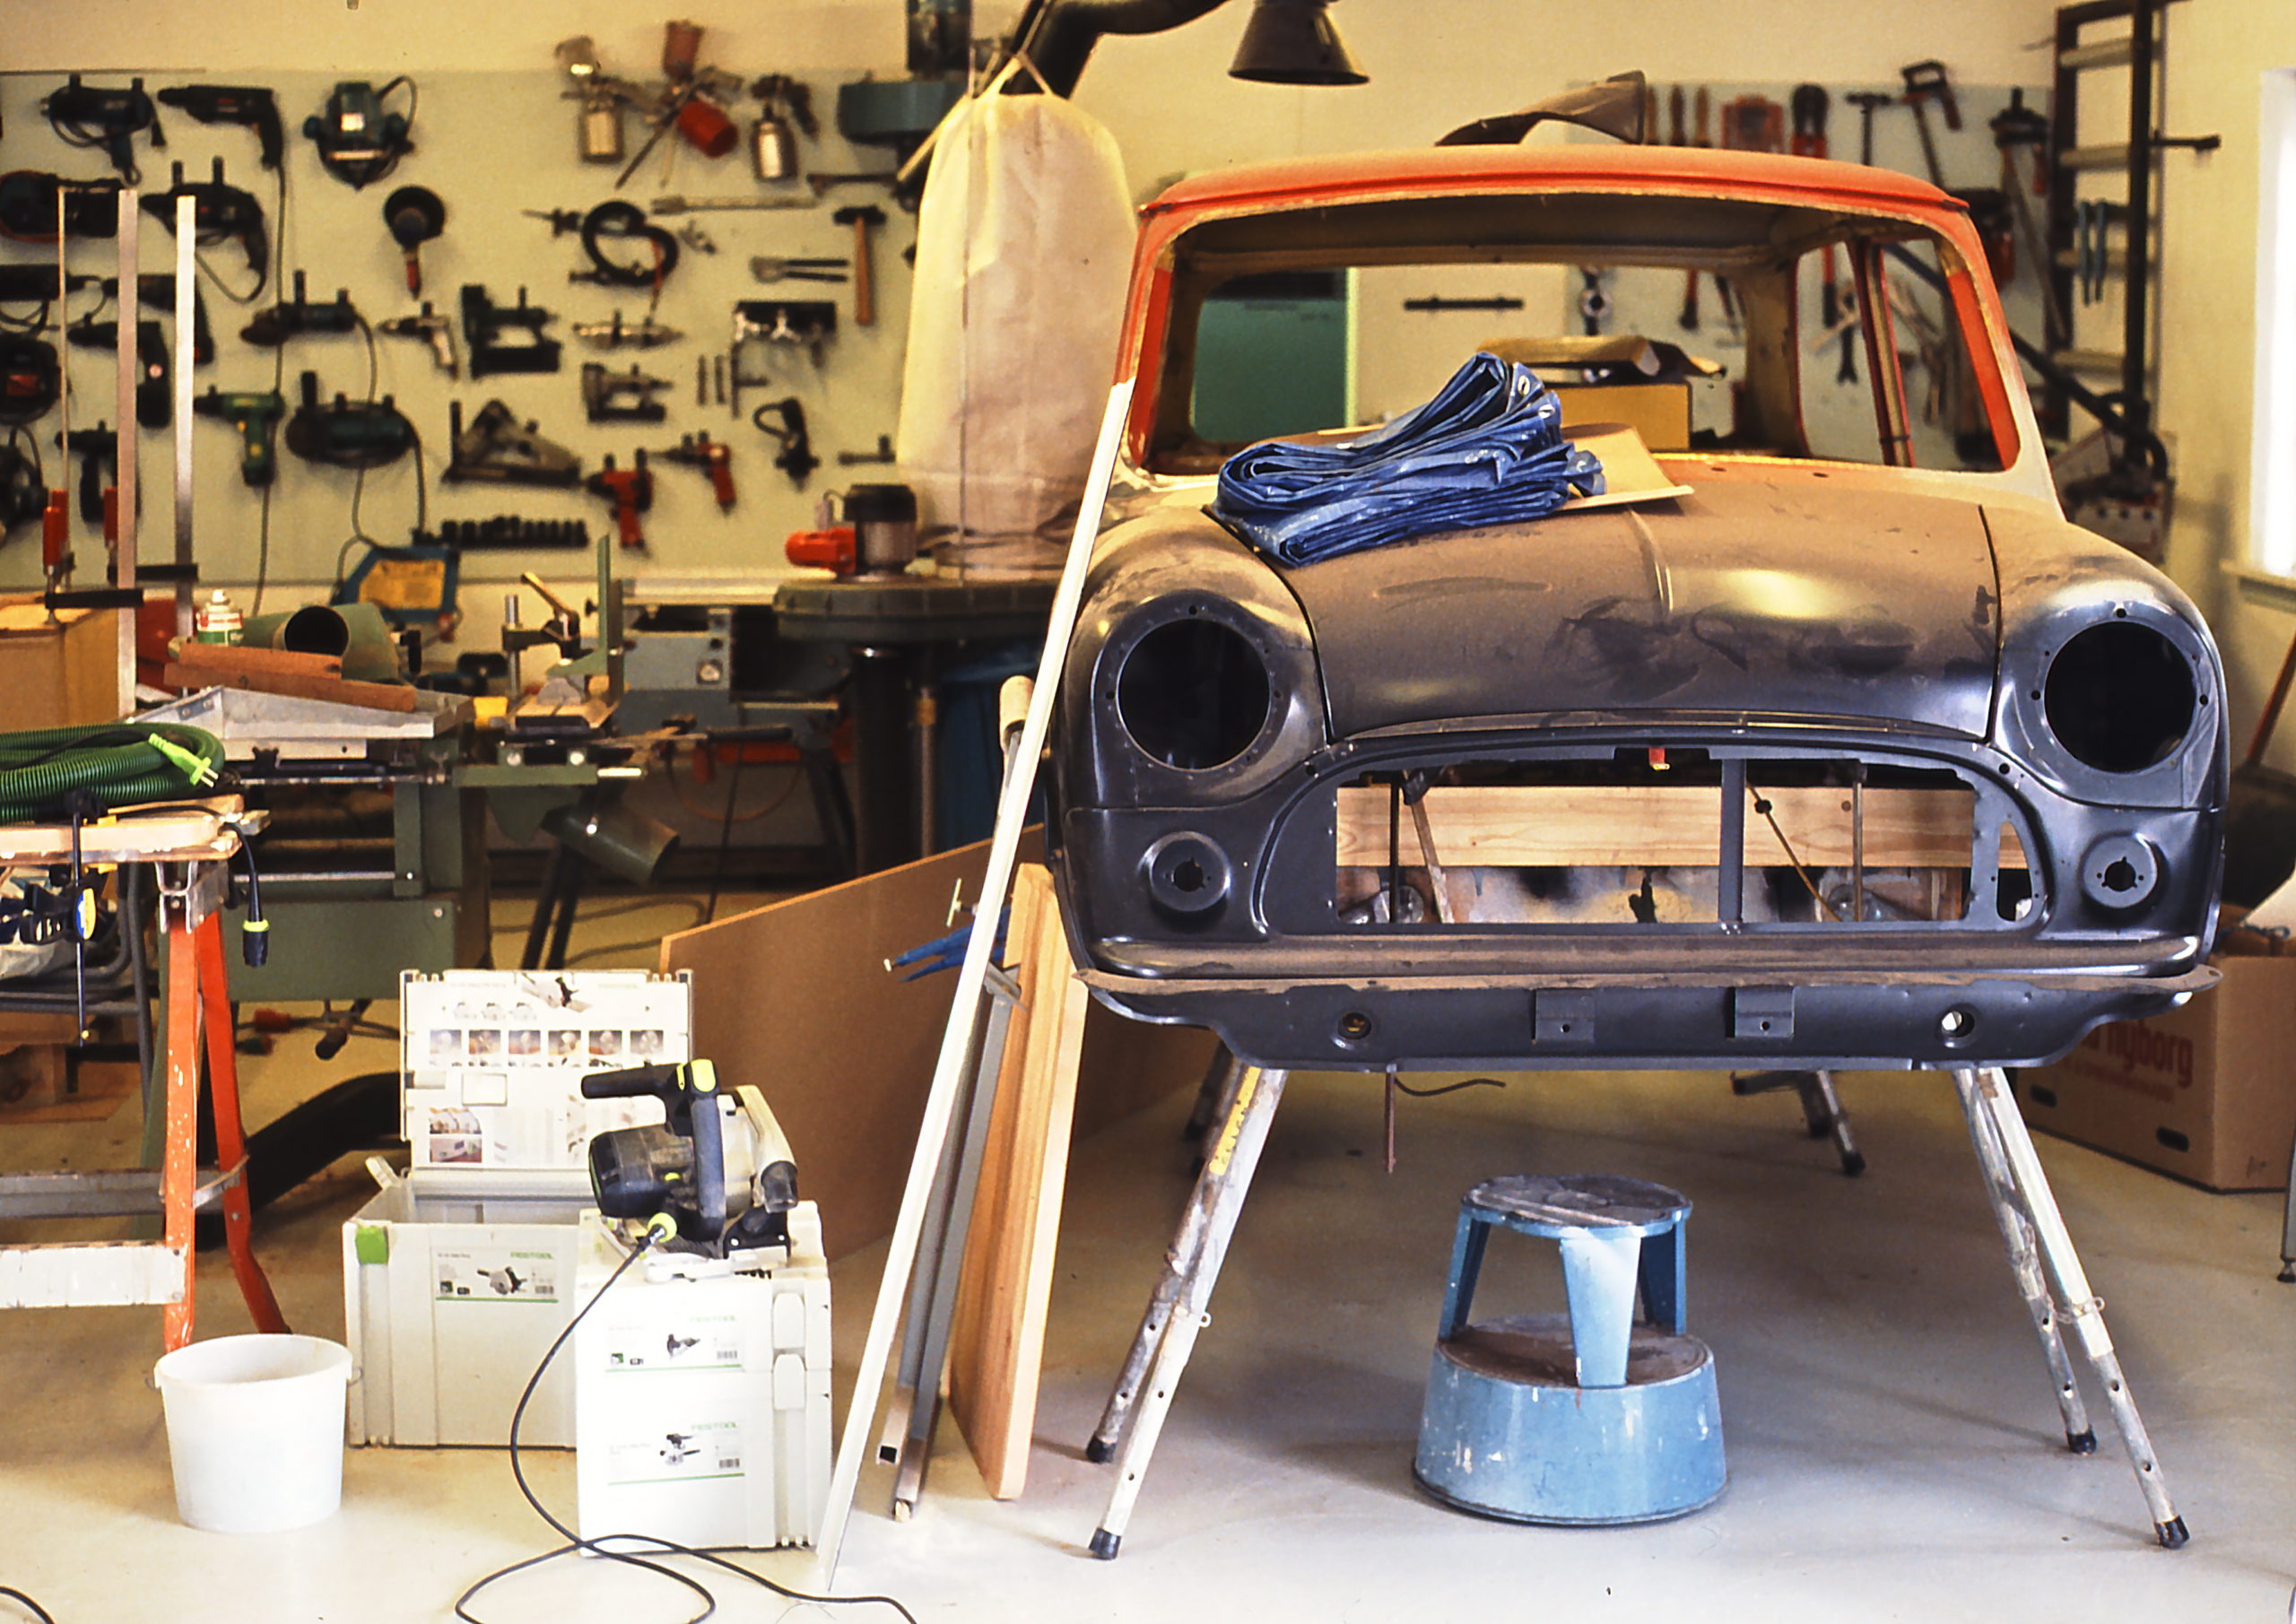 Hagerty Launches Foundation to Support Car Culture | THE SHOP